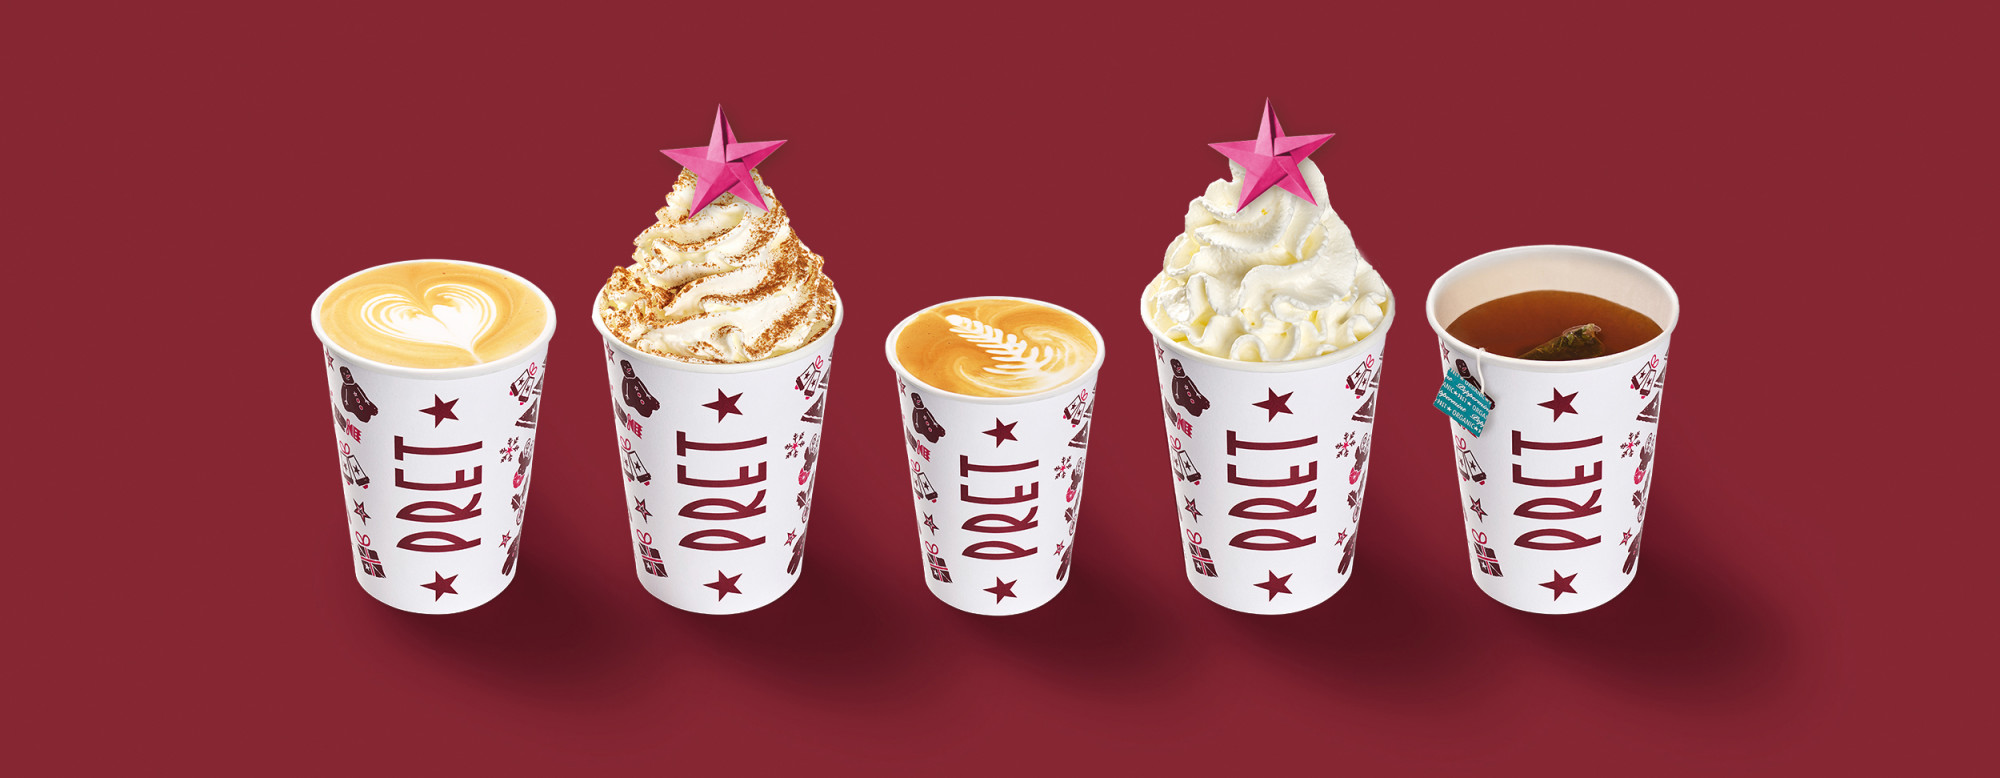 Pret Coffee Subscription* - Get your first month for only £12.50!